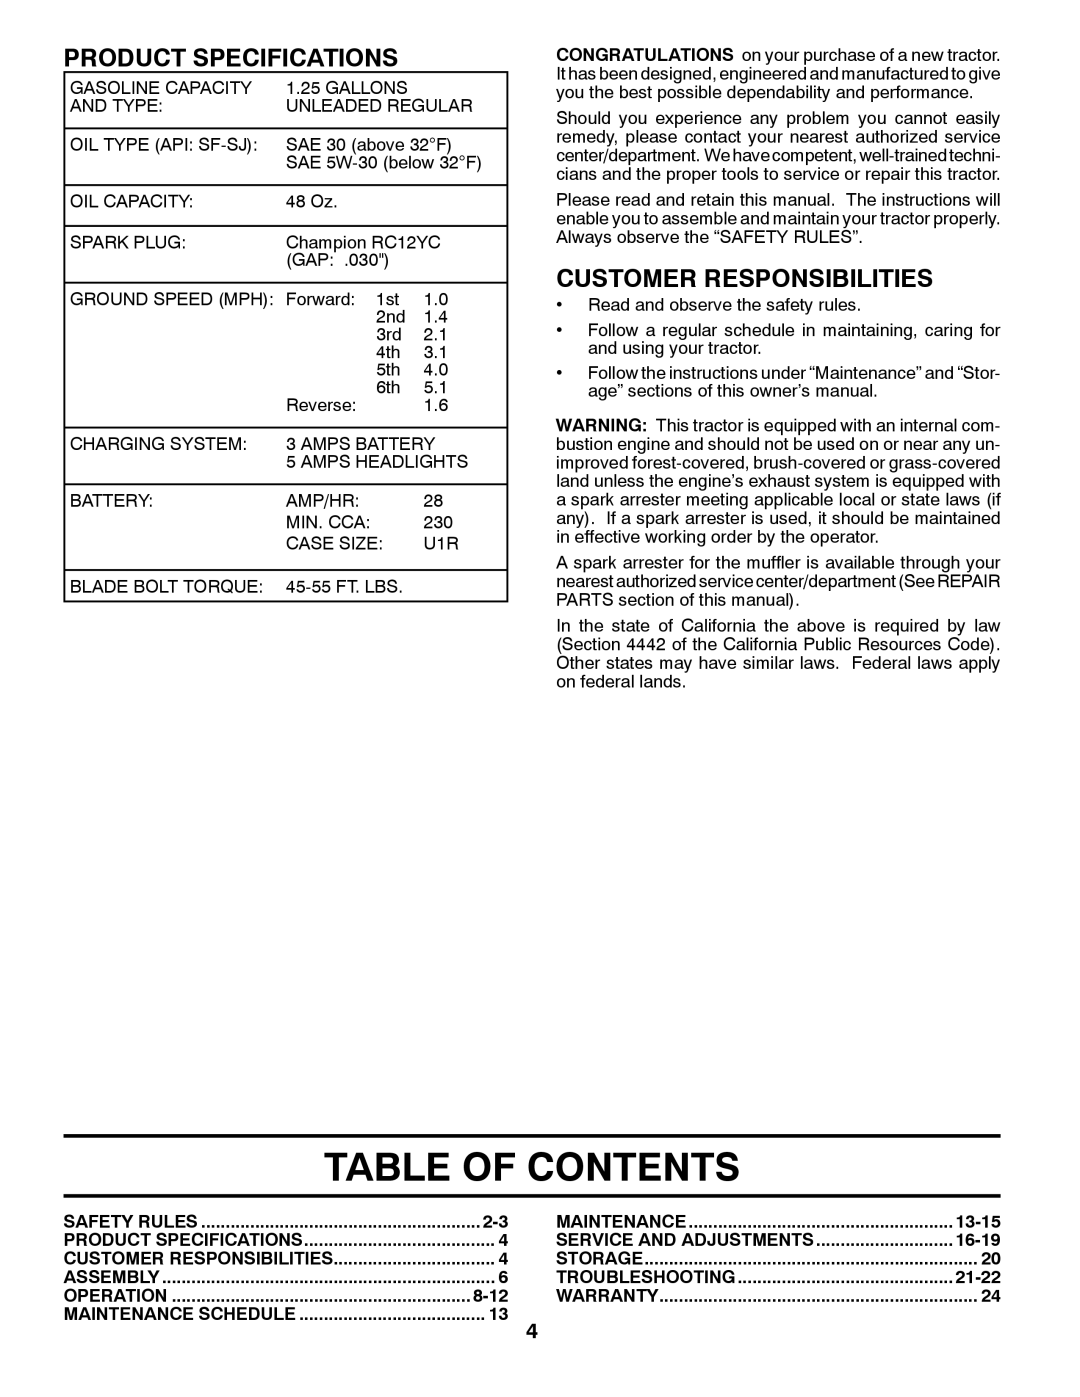 Poulan 424368 manual Table Of Contents, Product Specifications, Customer Responsibilities 